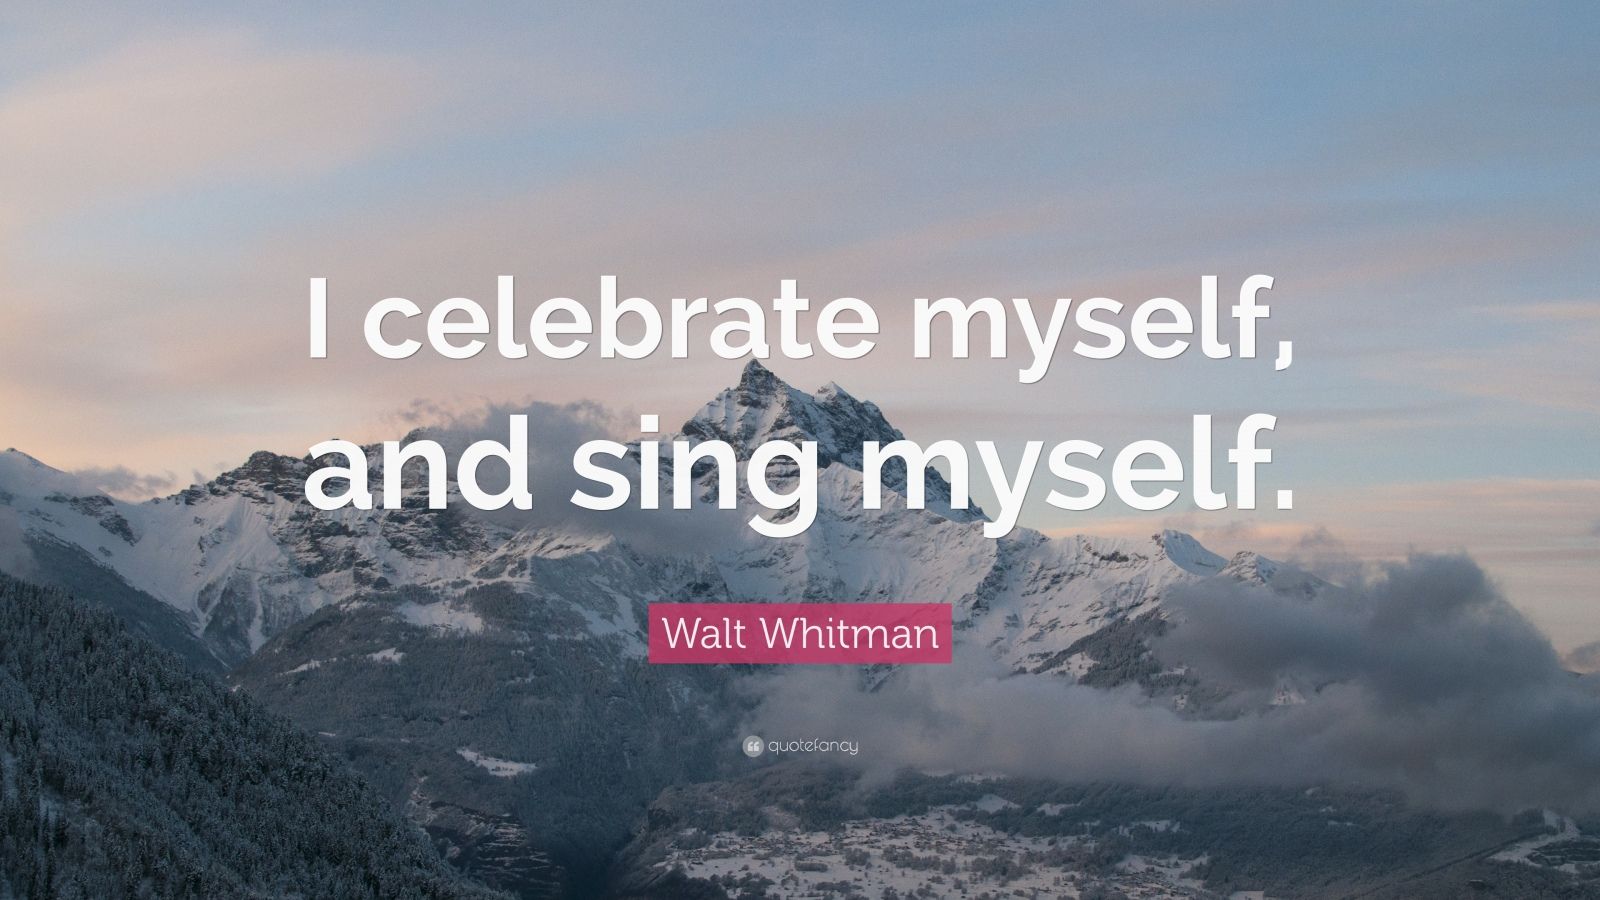 Walt Whitman Quote: "I celebrate myself, and sing myself." (12 wallpapers) - Quotefancy